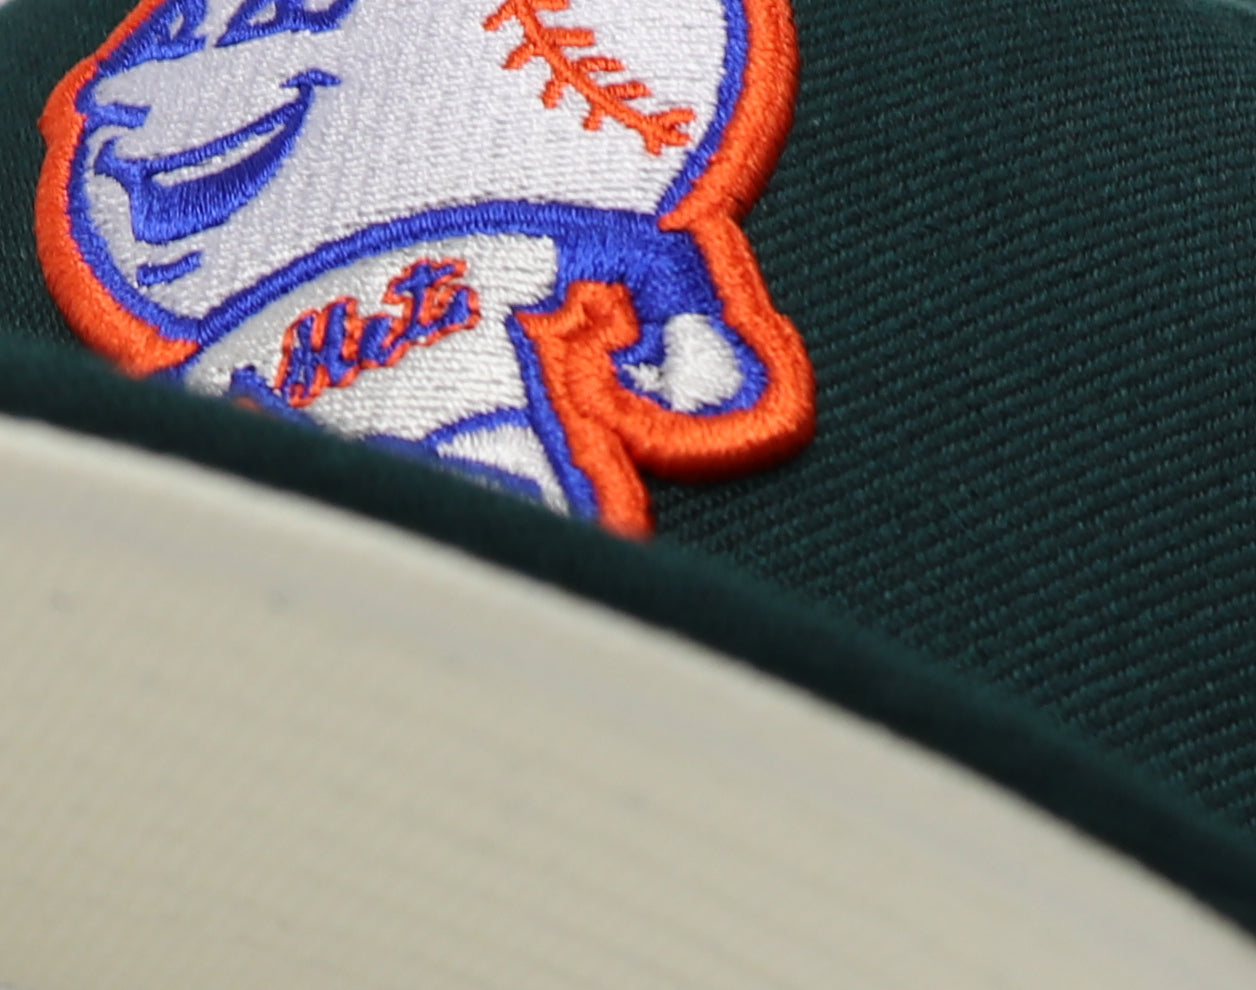 NEW YORK METS (DK-GREEN) (60TH ANN) NEW ERA 59FIFTY FITTED (OFF-WHITE UNDER VISOR)